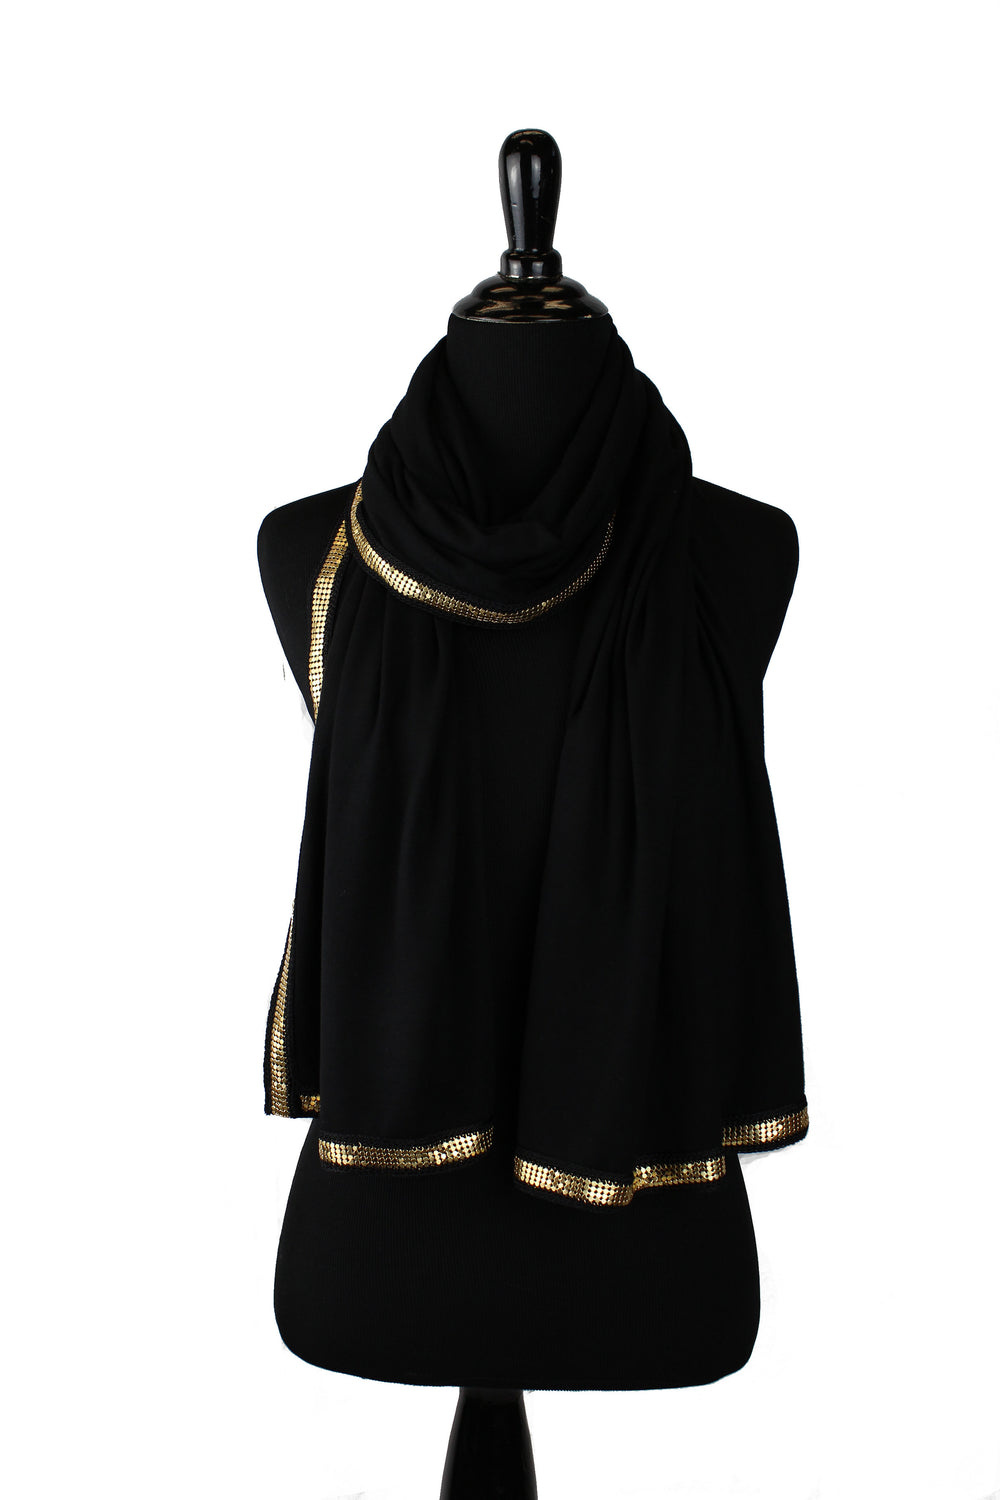 black jersey hijab embellished with a gold trim along the edges